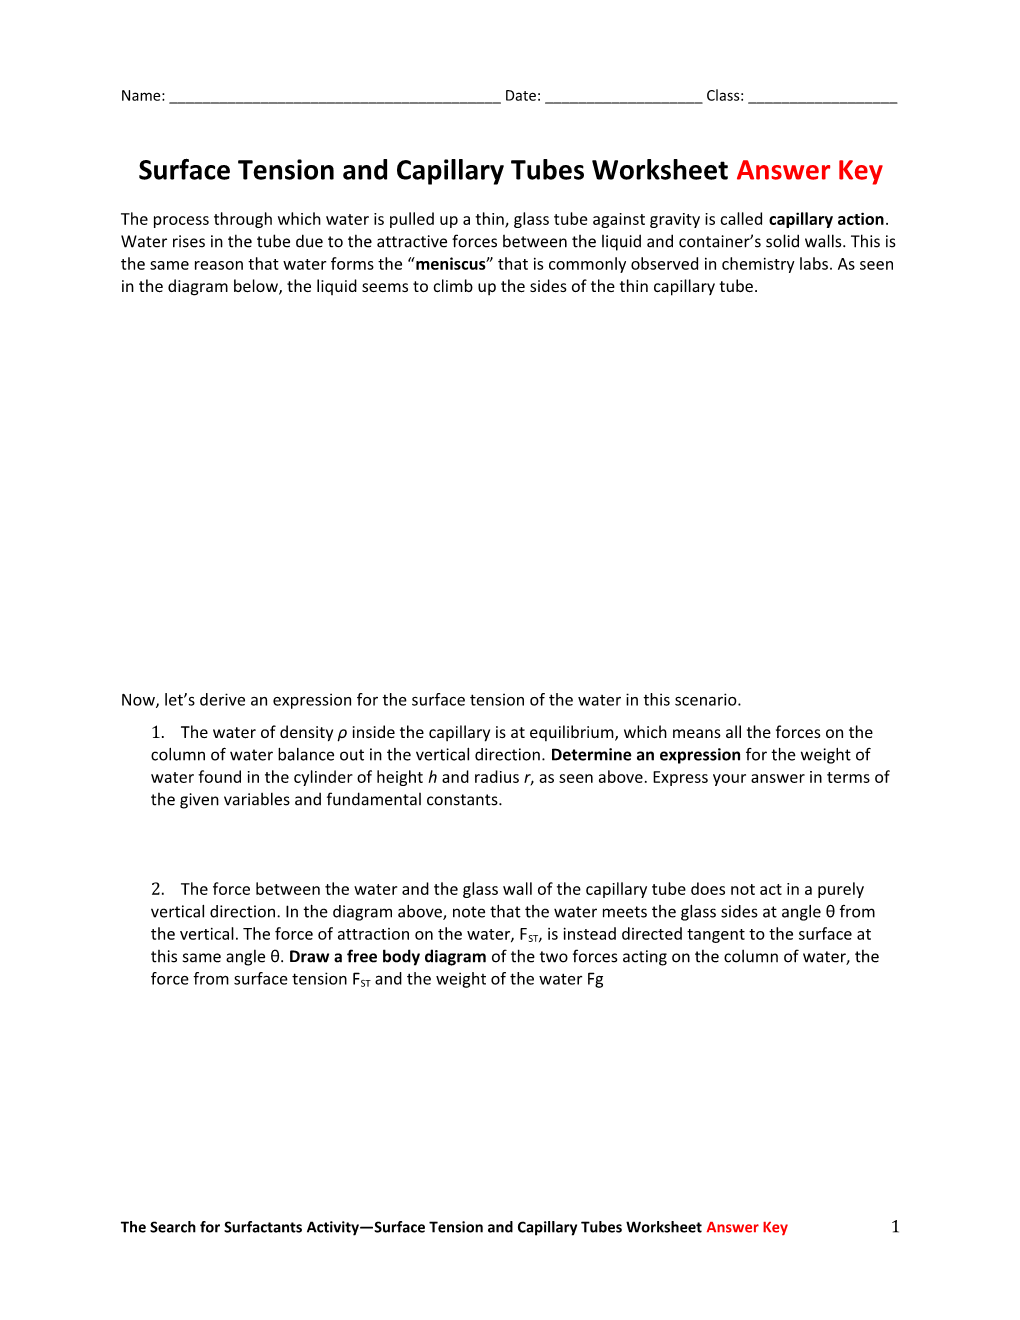 Surface Tension and Capillary Tubesworksheetanswer Key